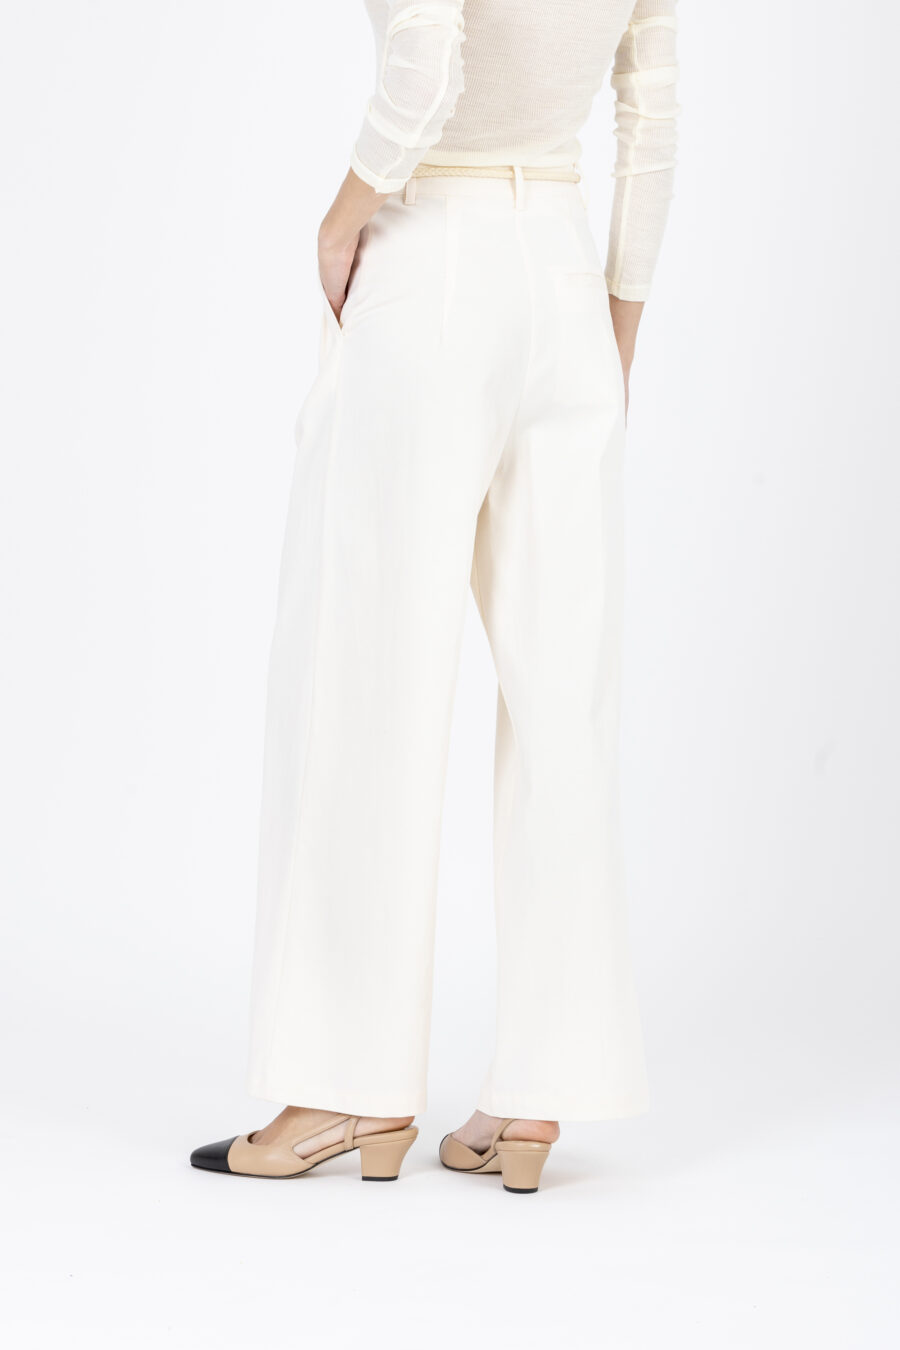 roni-cream-off-white-pleated-trousers-pants-uniforme-athens-buttons